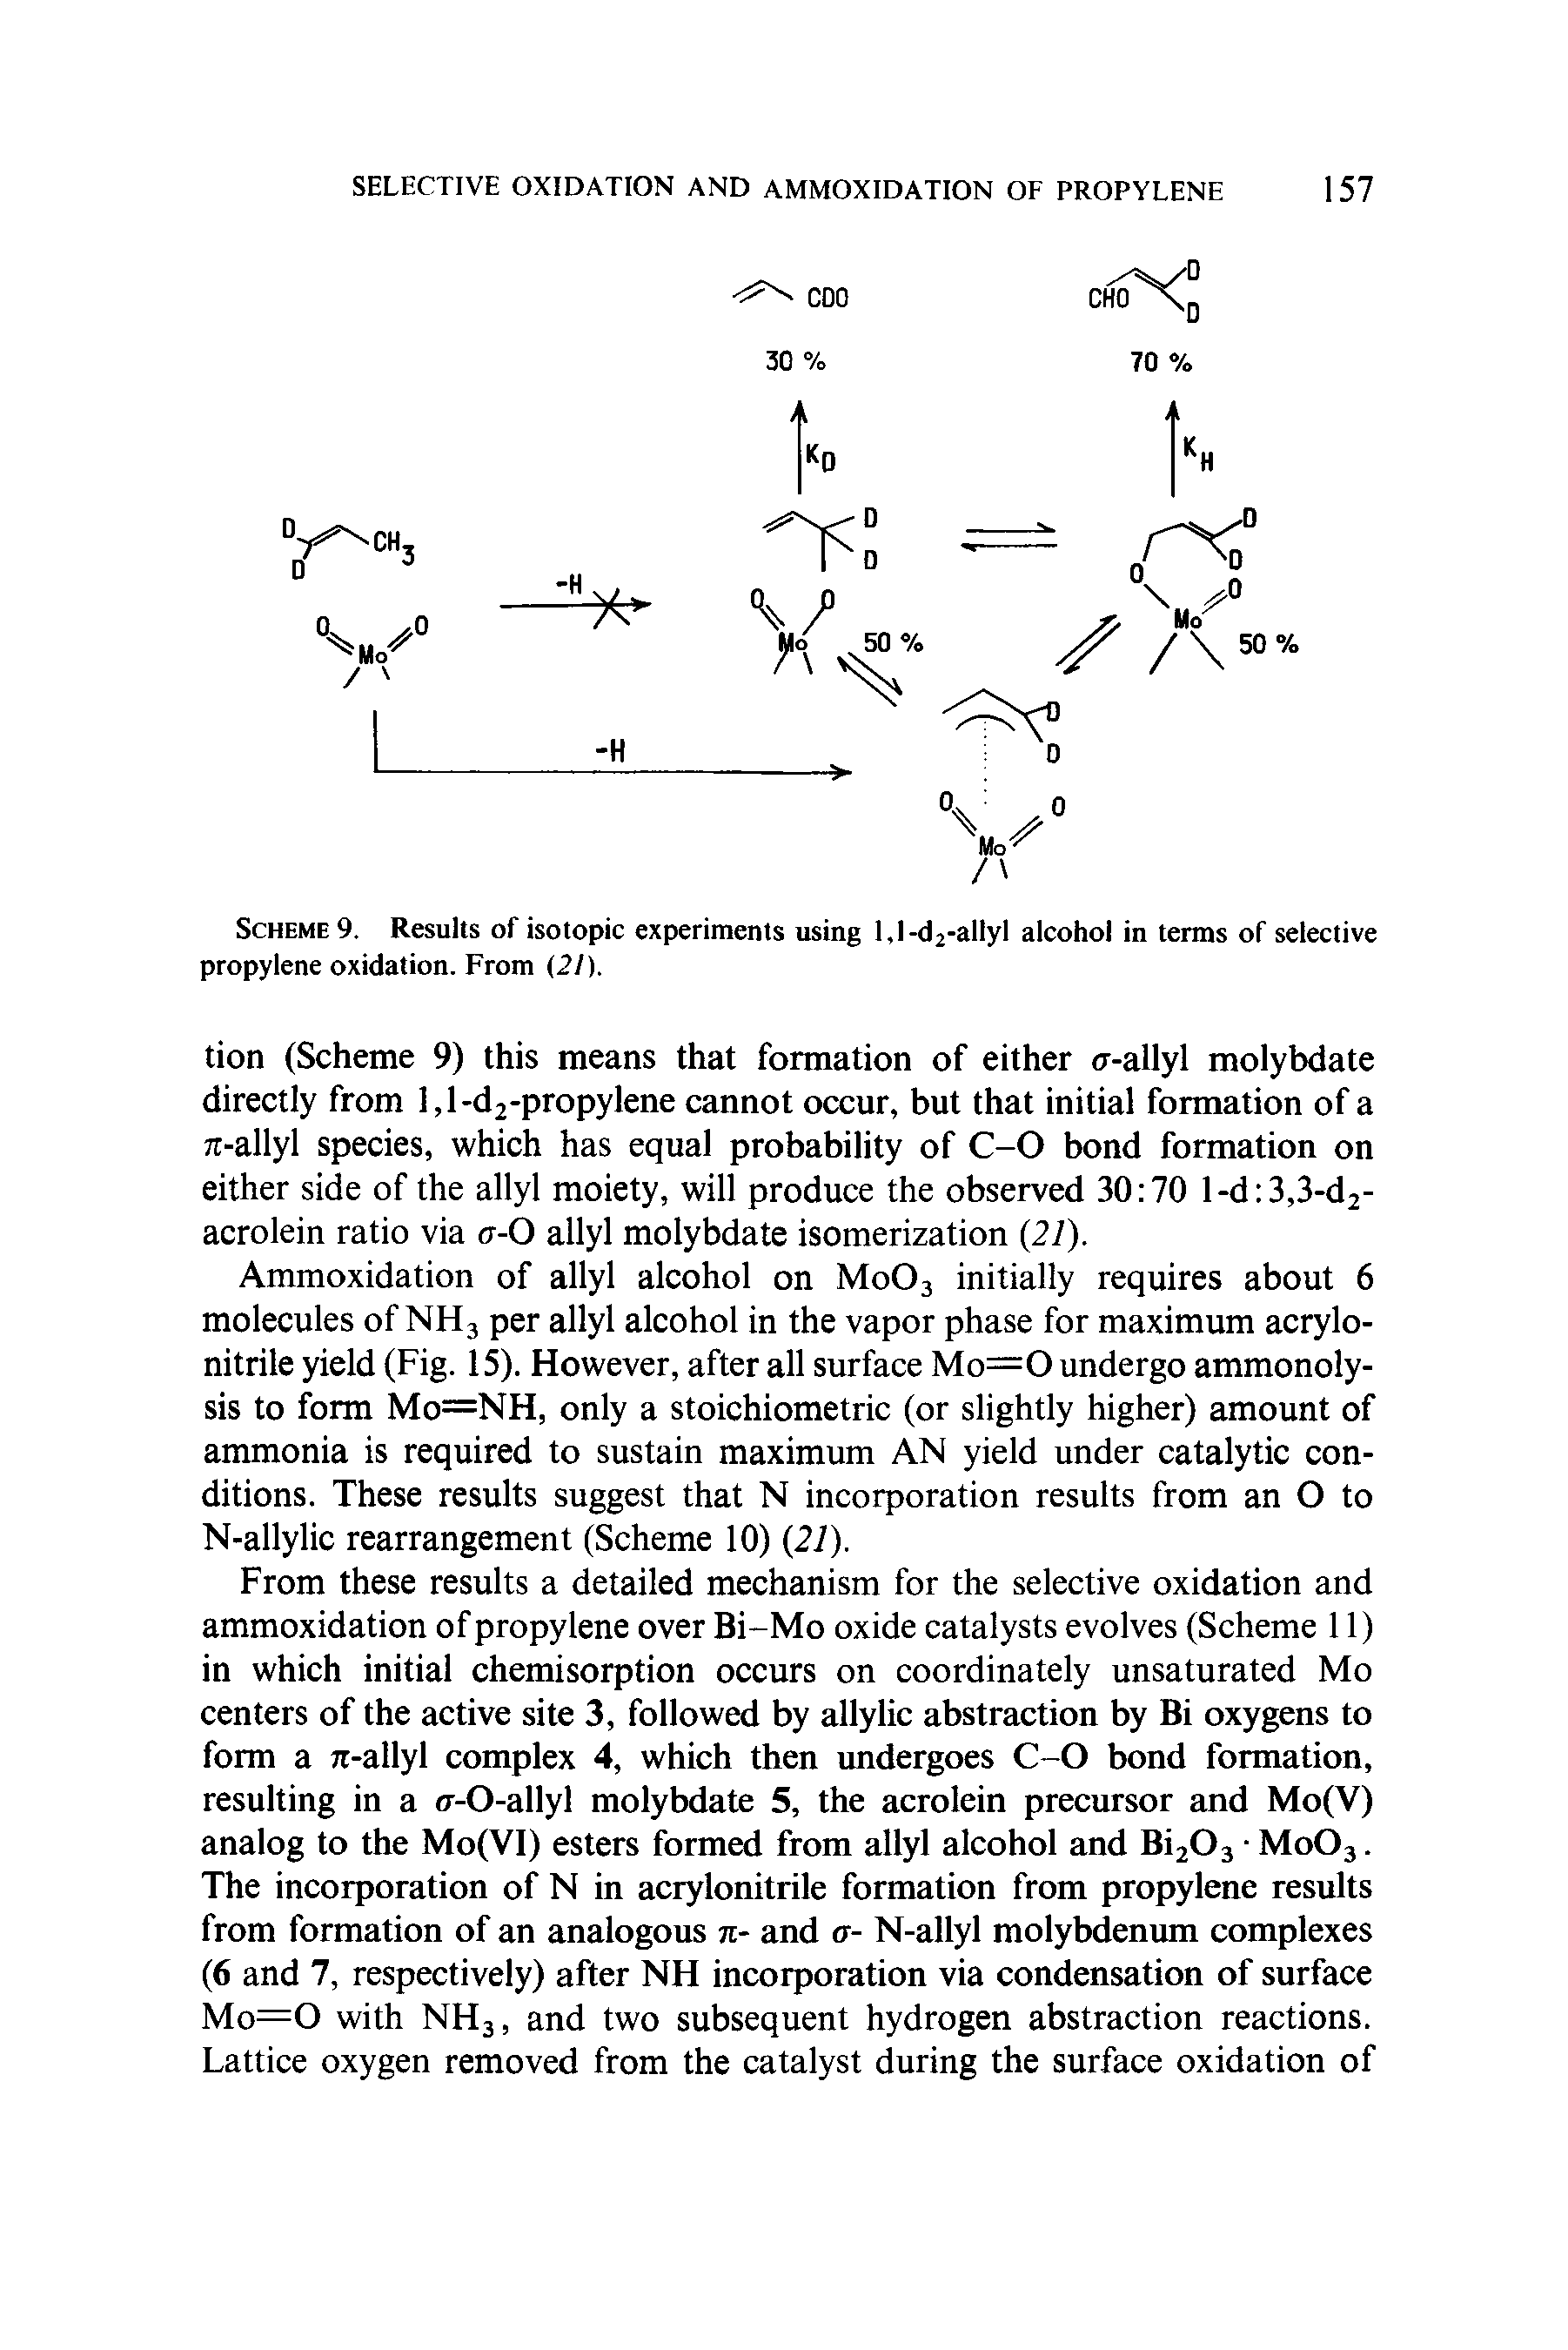 Scheme 9. Results of isotopic experiments using I,l-<l2-allyl alcohol in terms of selective propylene oxidation. From (2/).